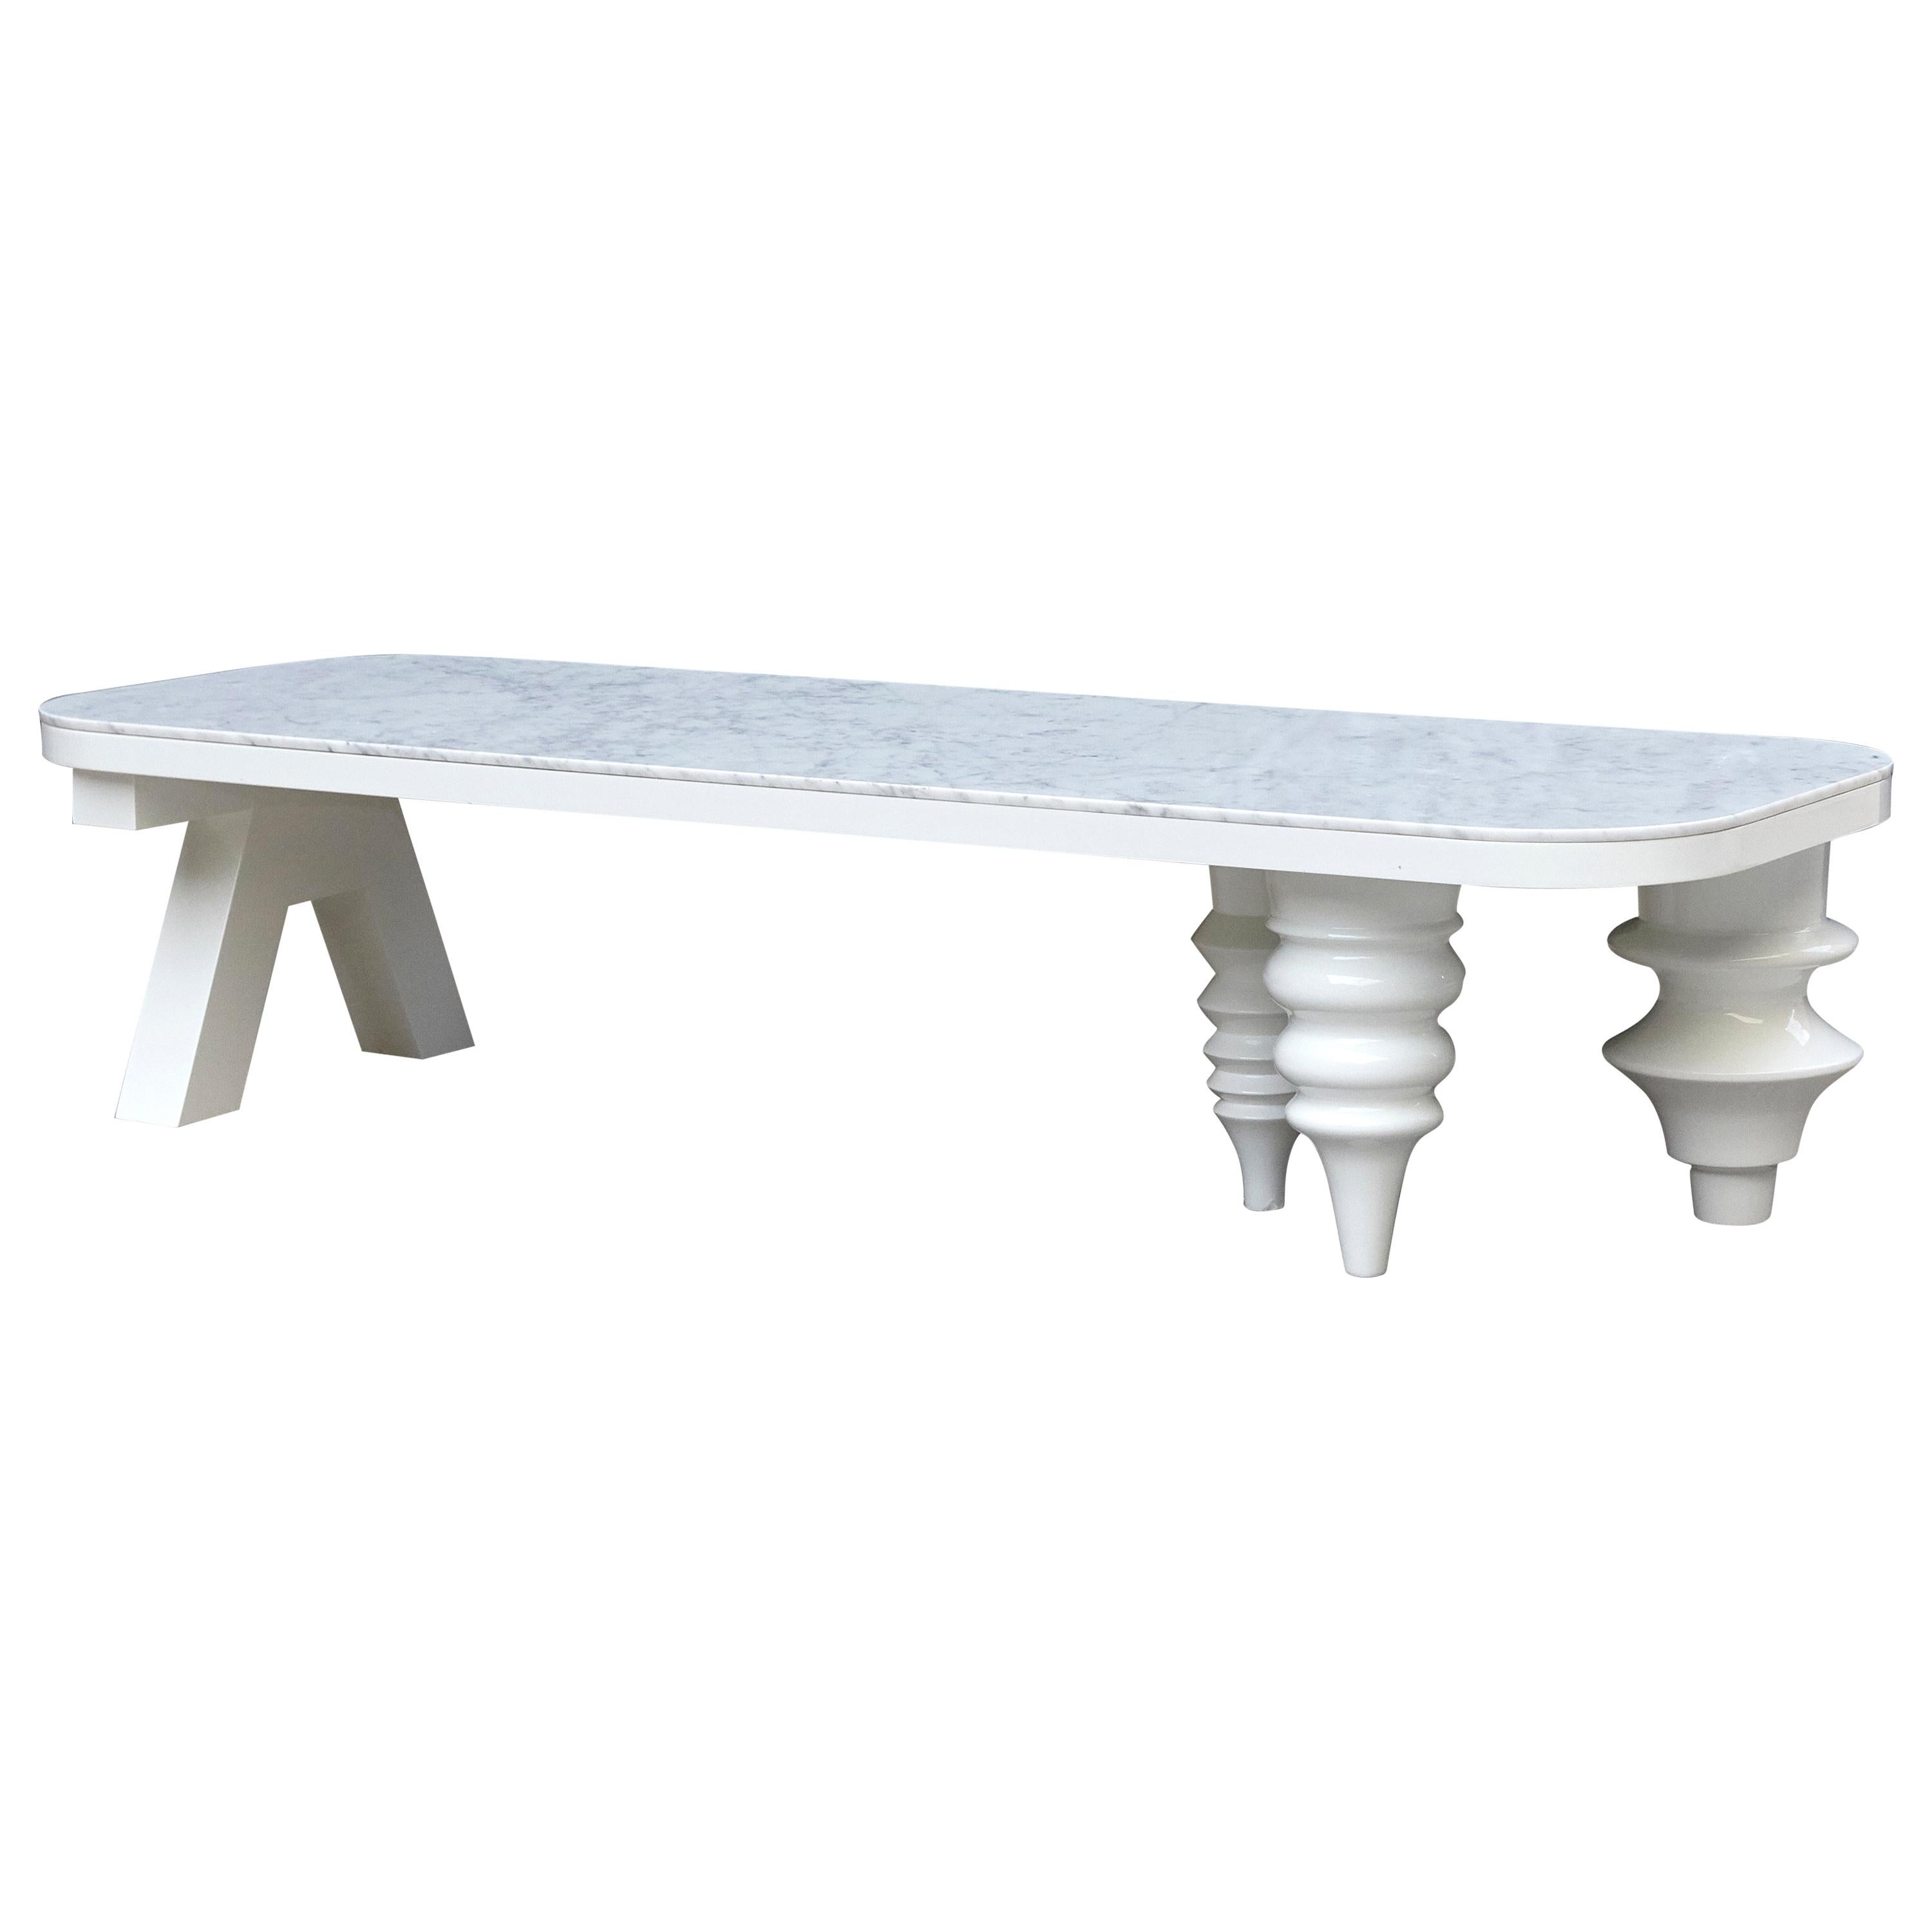 Jaime Hayon Black and White Marble Multileg Low Table by BD Barcelona